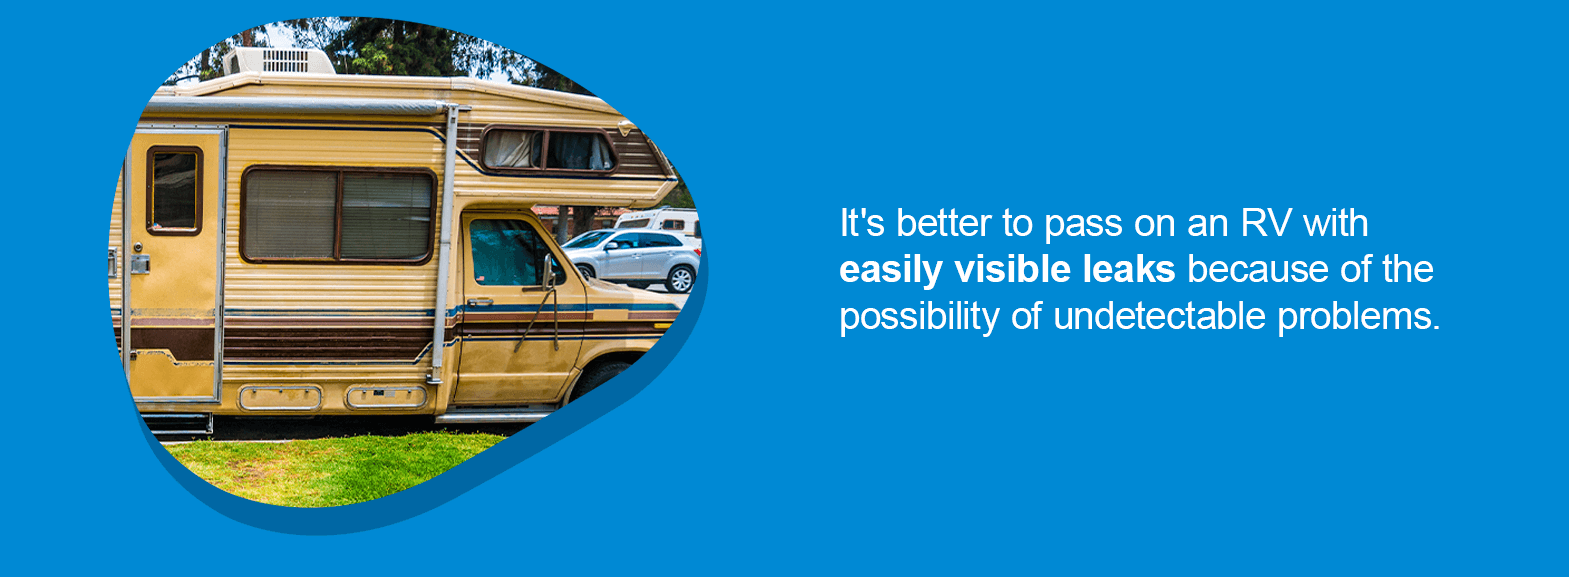 It's better to pass on an RV with easily visible leaks because of the possibility of undetectable problems.